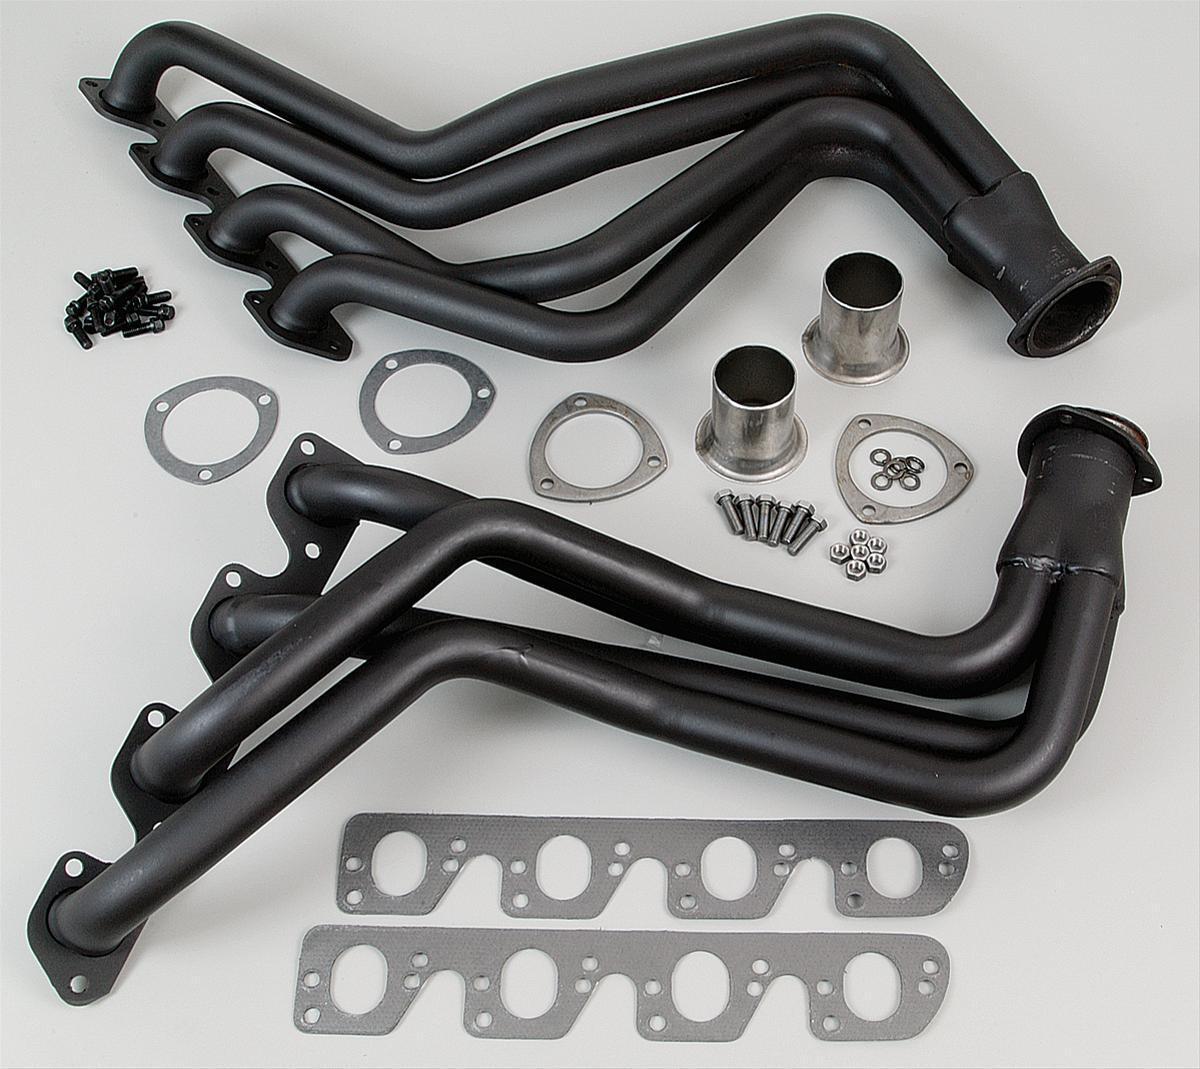   NEW HEADERS FORD F150 F250 F350 BRONCO TRUCK 351 MODIFIED AND 400